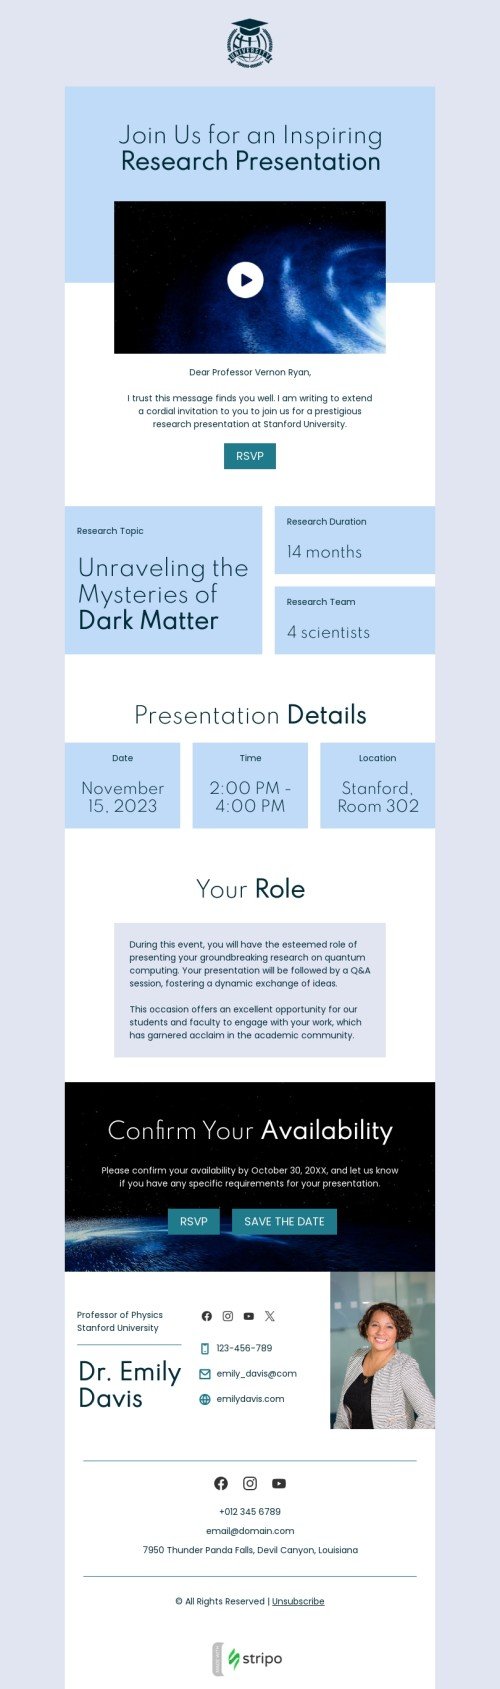 Events email template "Inspiring research presentation" for professor email industry mobile view